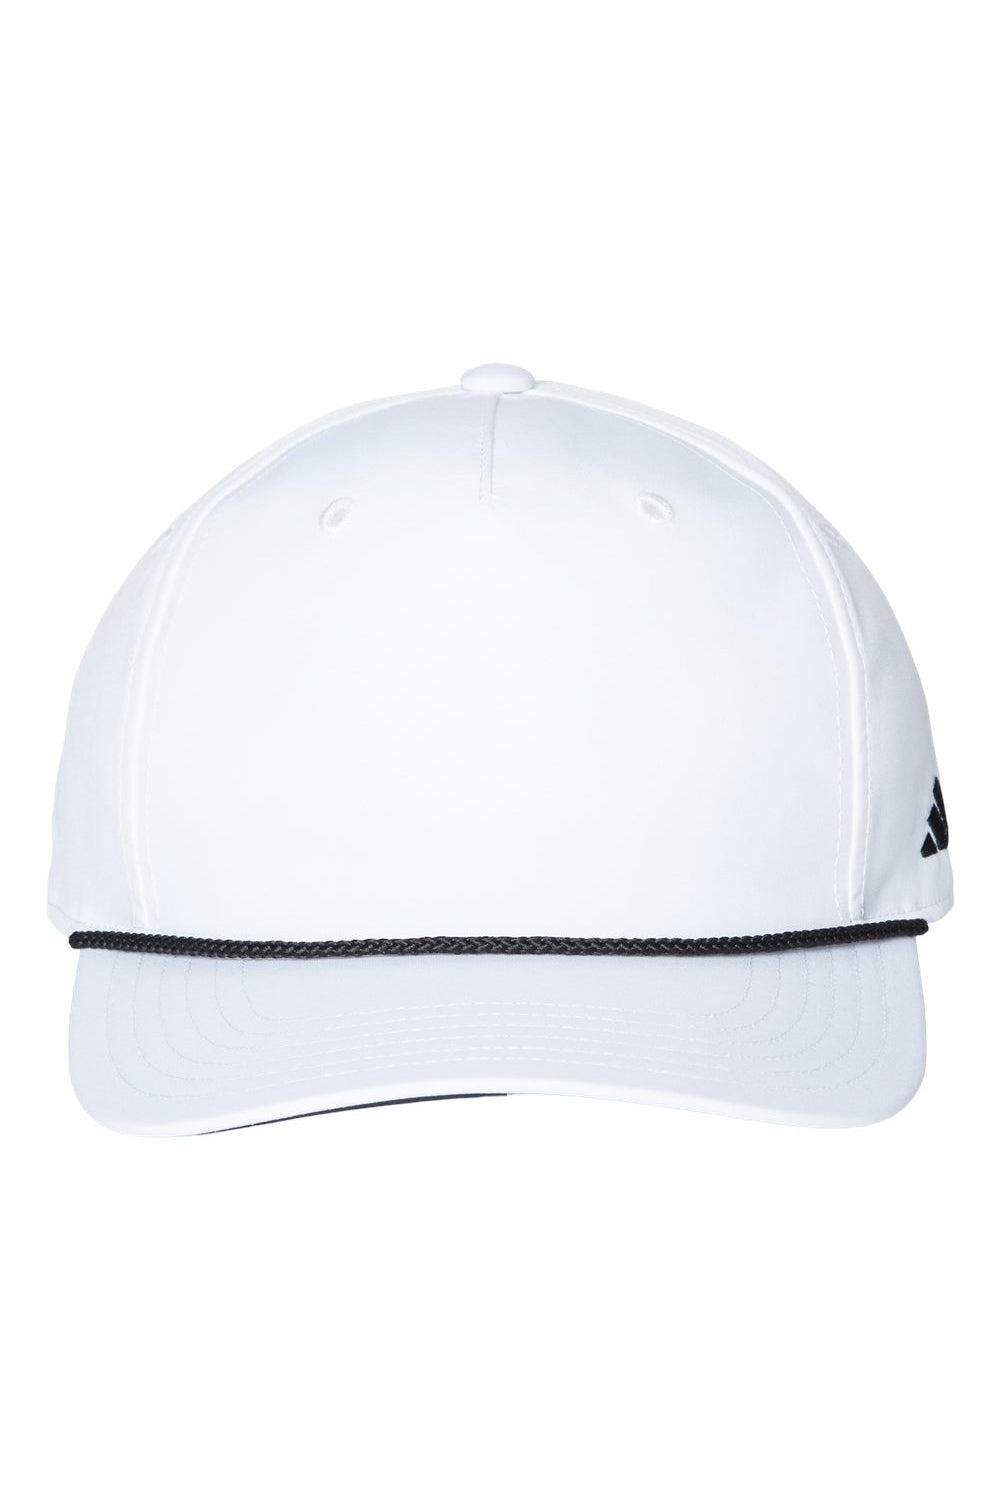 Adidas A671S Mens Sustainable Moisture Wicking Rope Snapback Hat White Flat Front